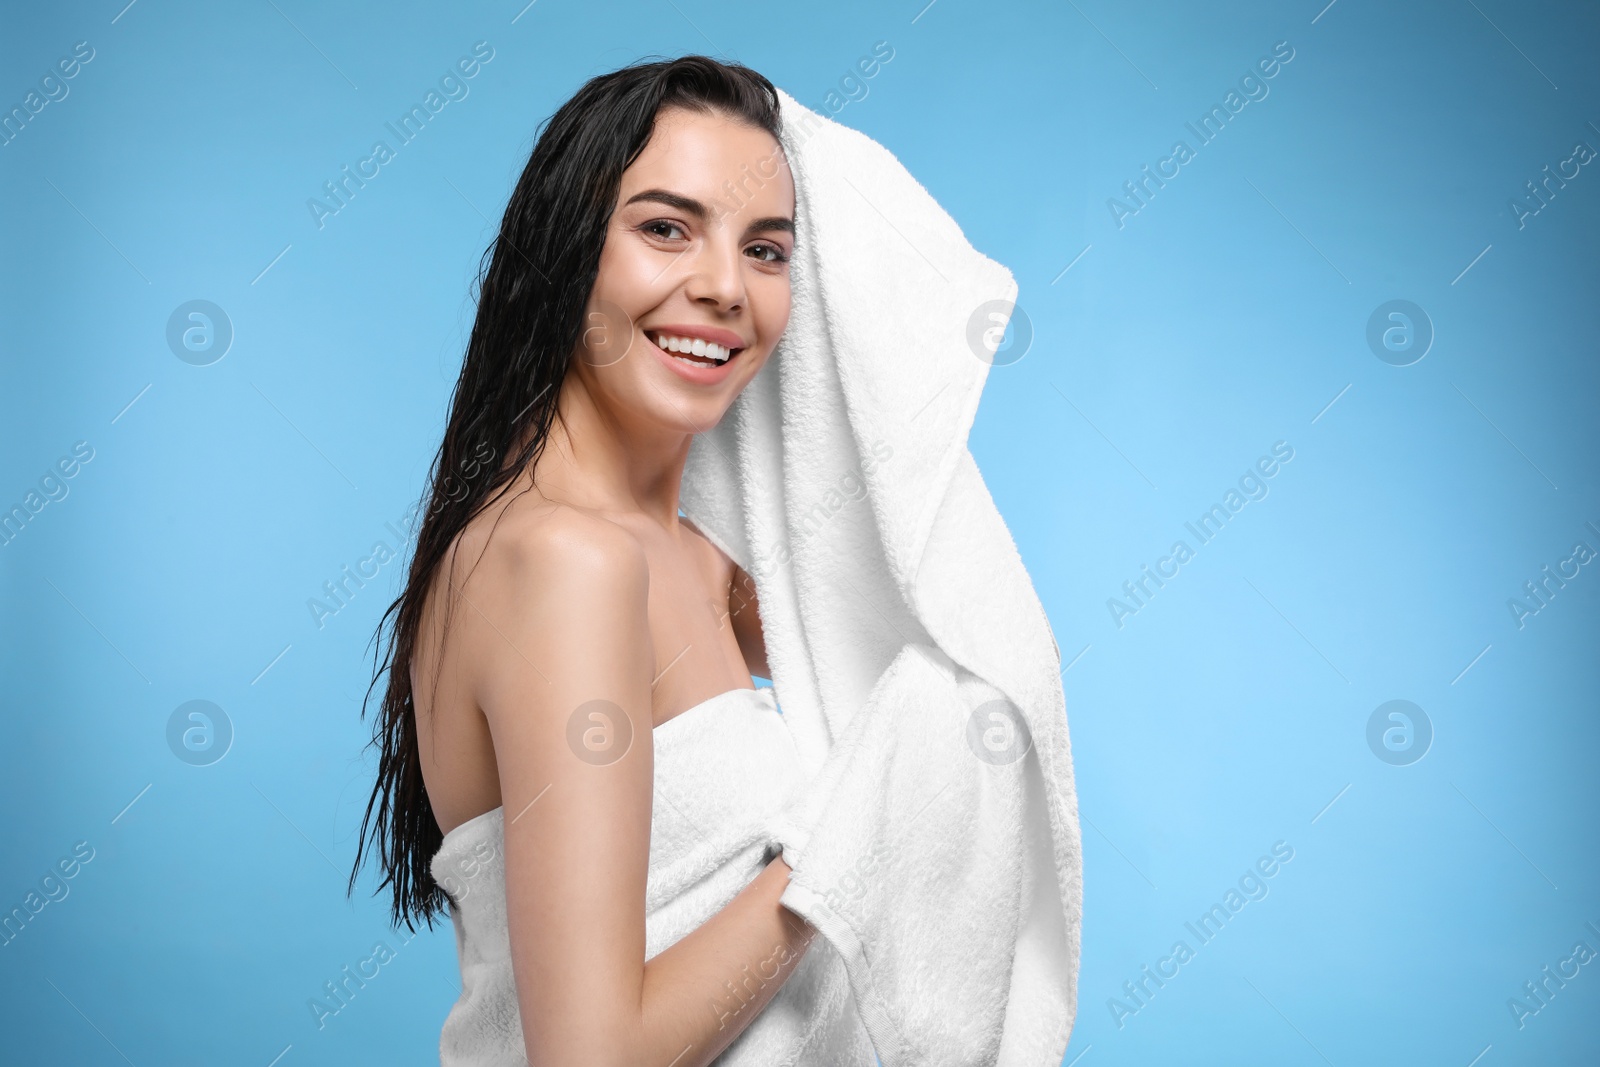 Photo of Happy young woman drying hair with towel after washing on light blue background